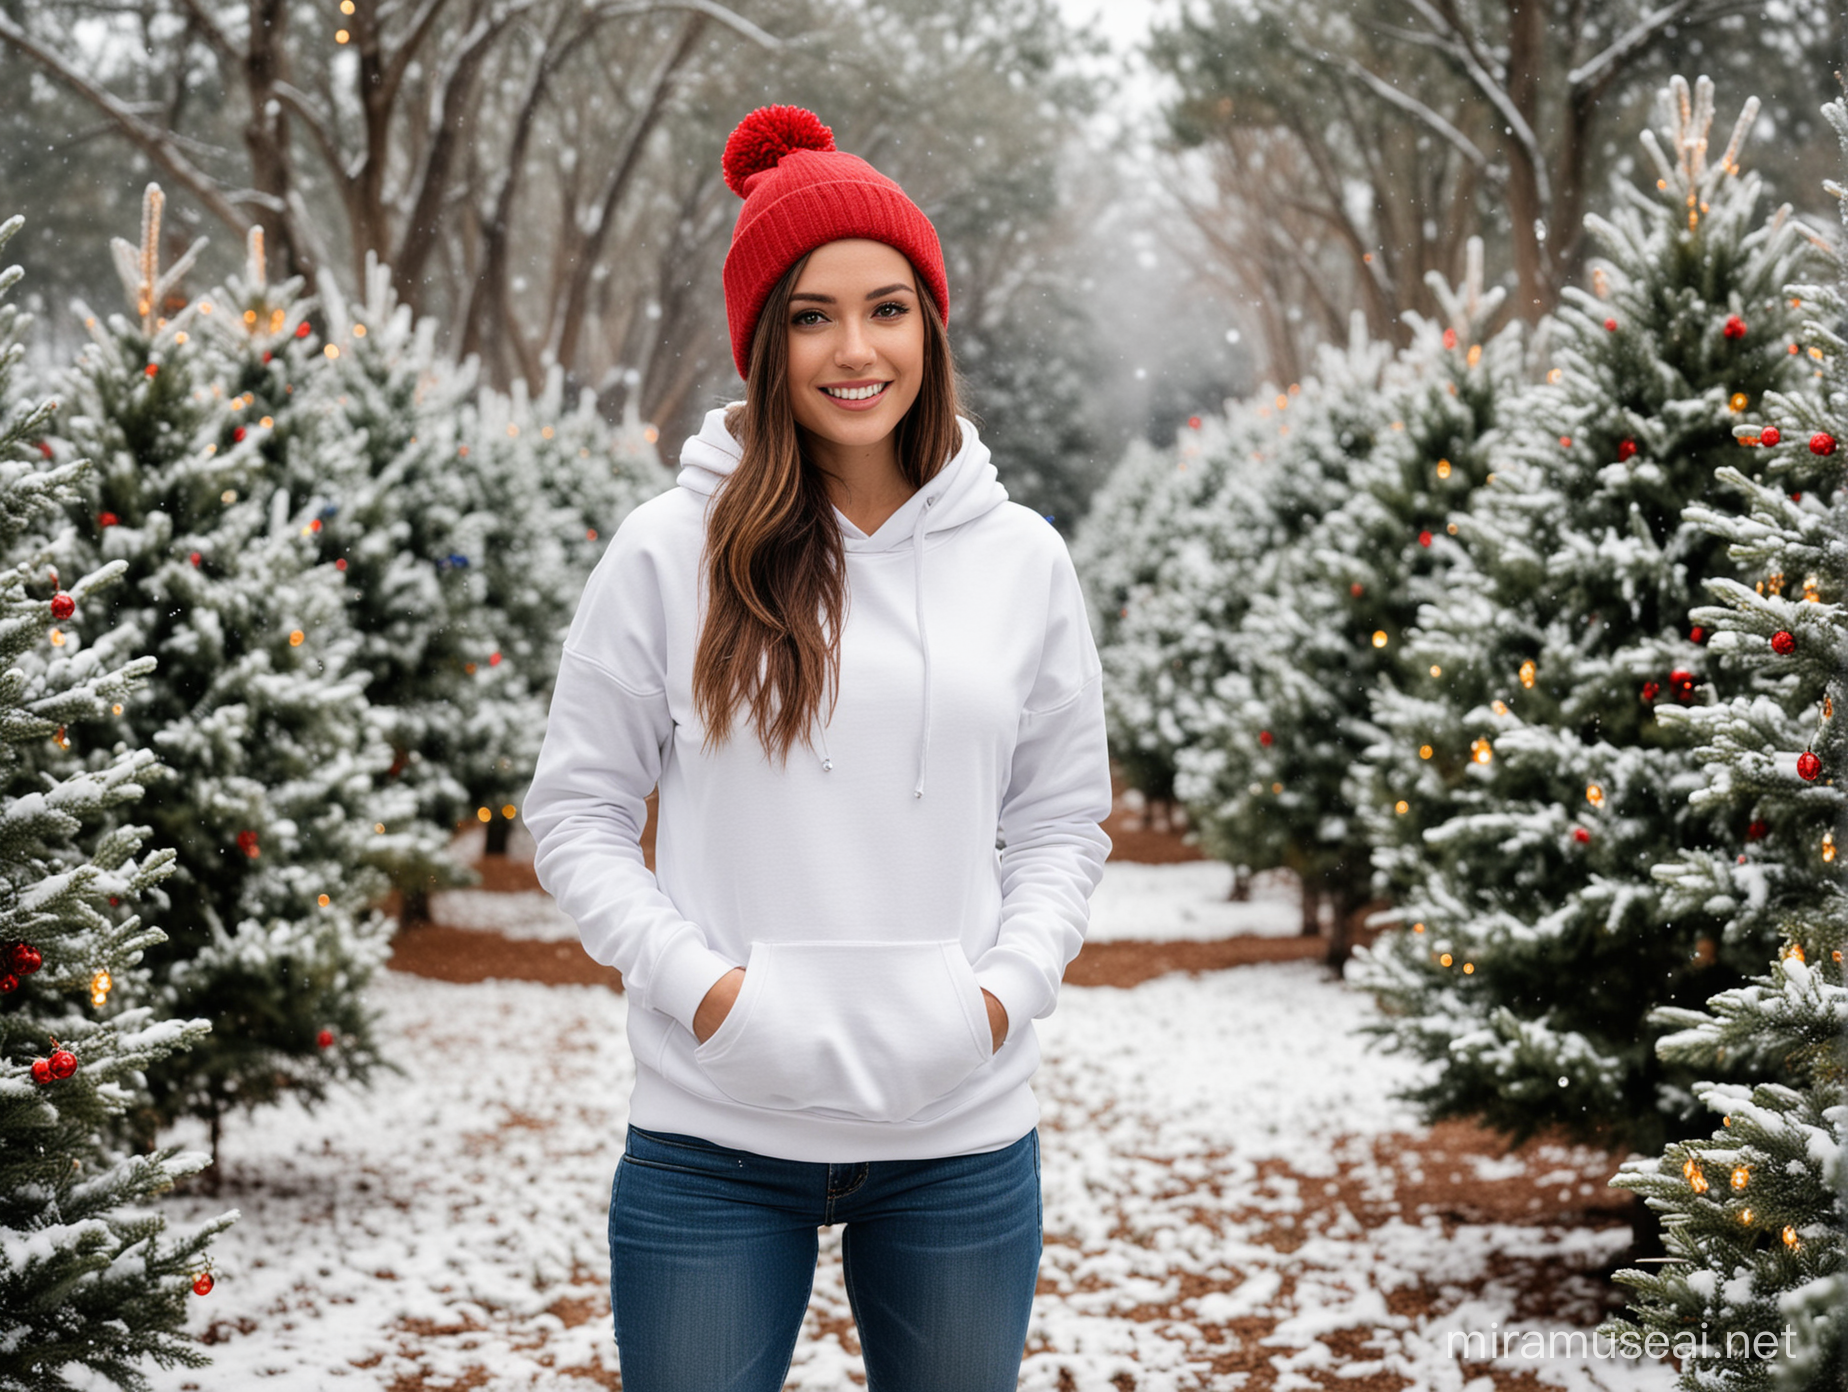 Stylish Woman in White Hoodie and Beanie at Snowy Christmas Tree Farm